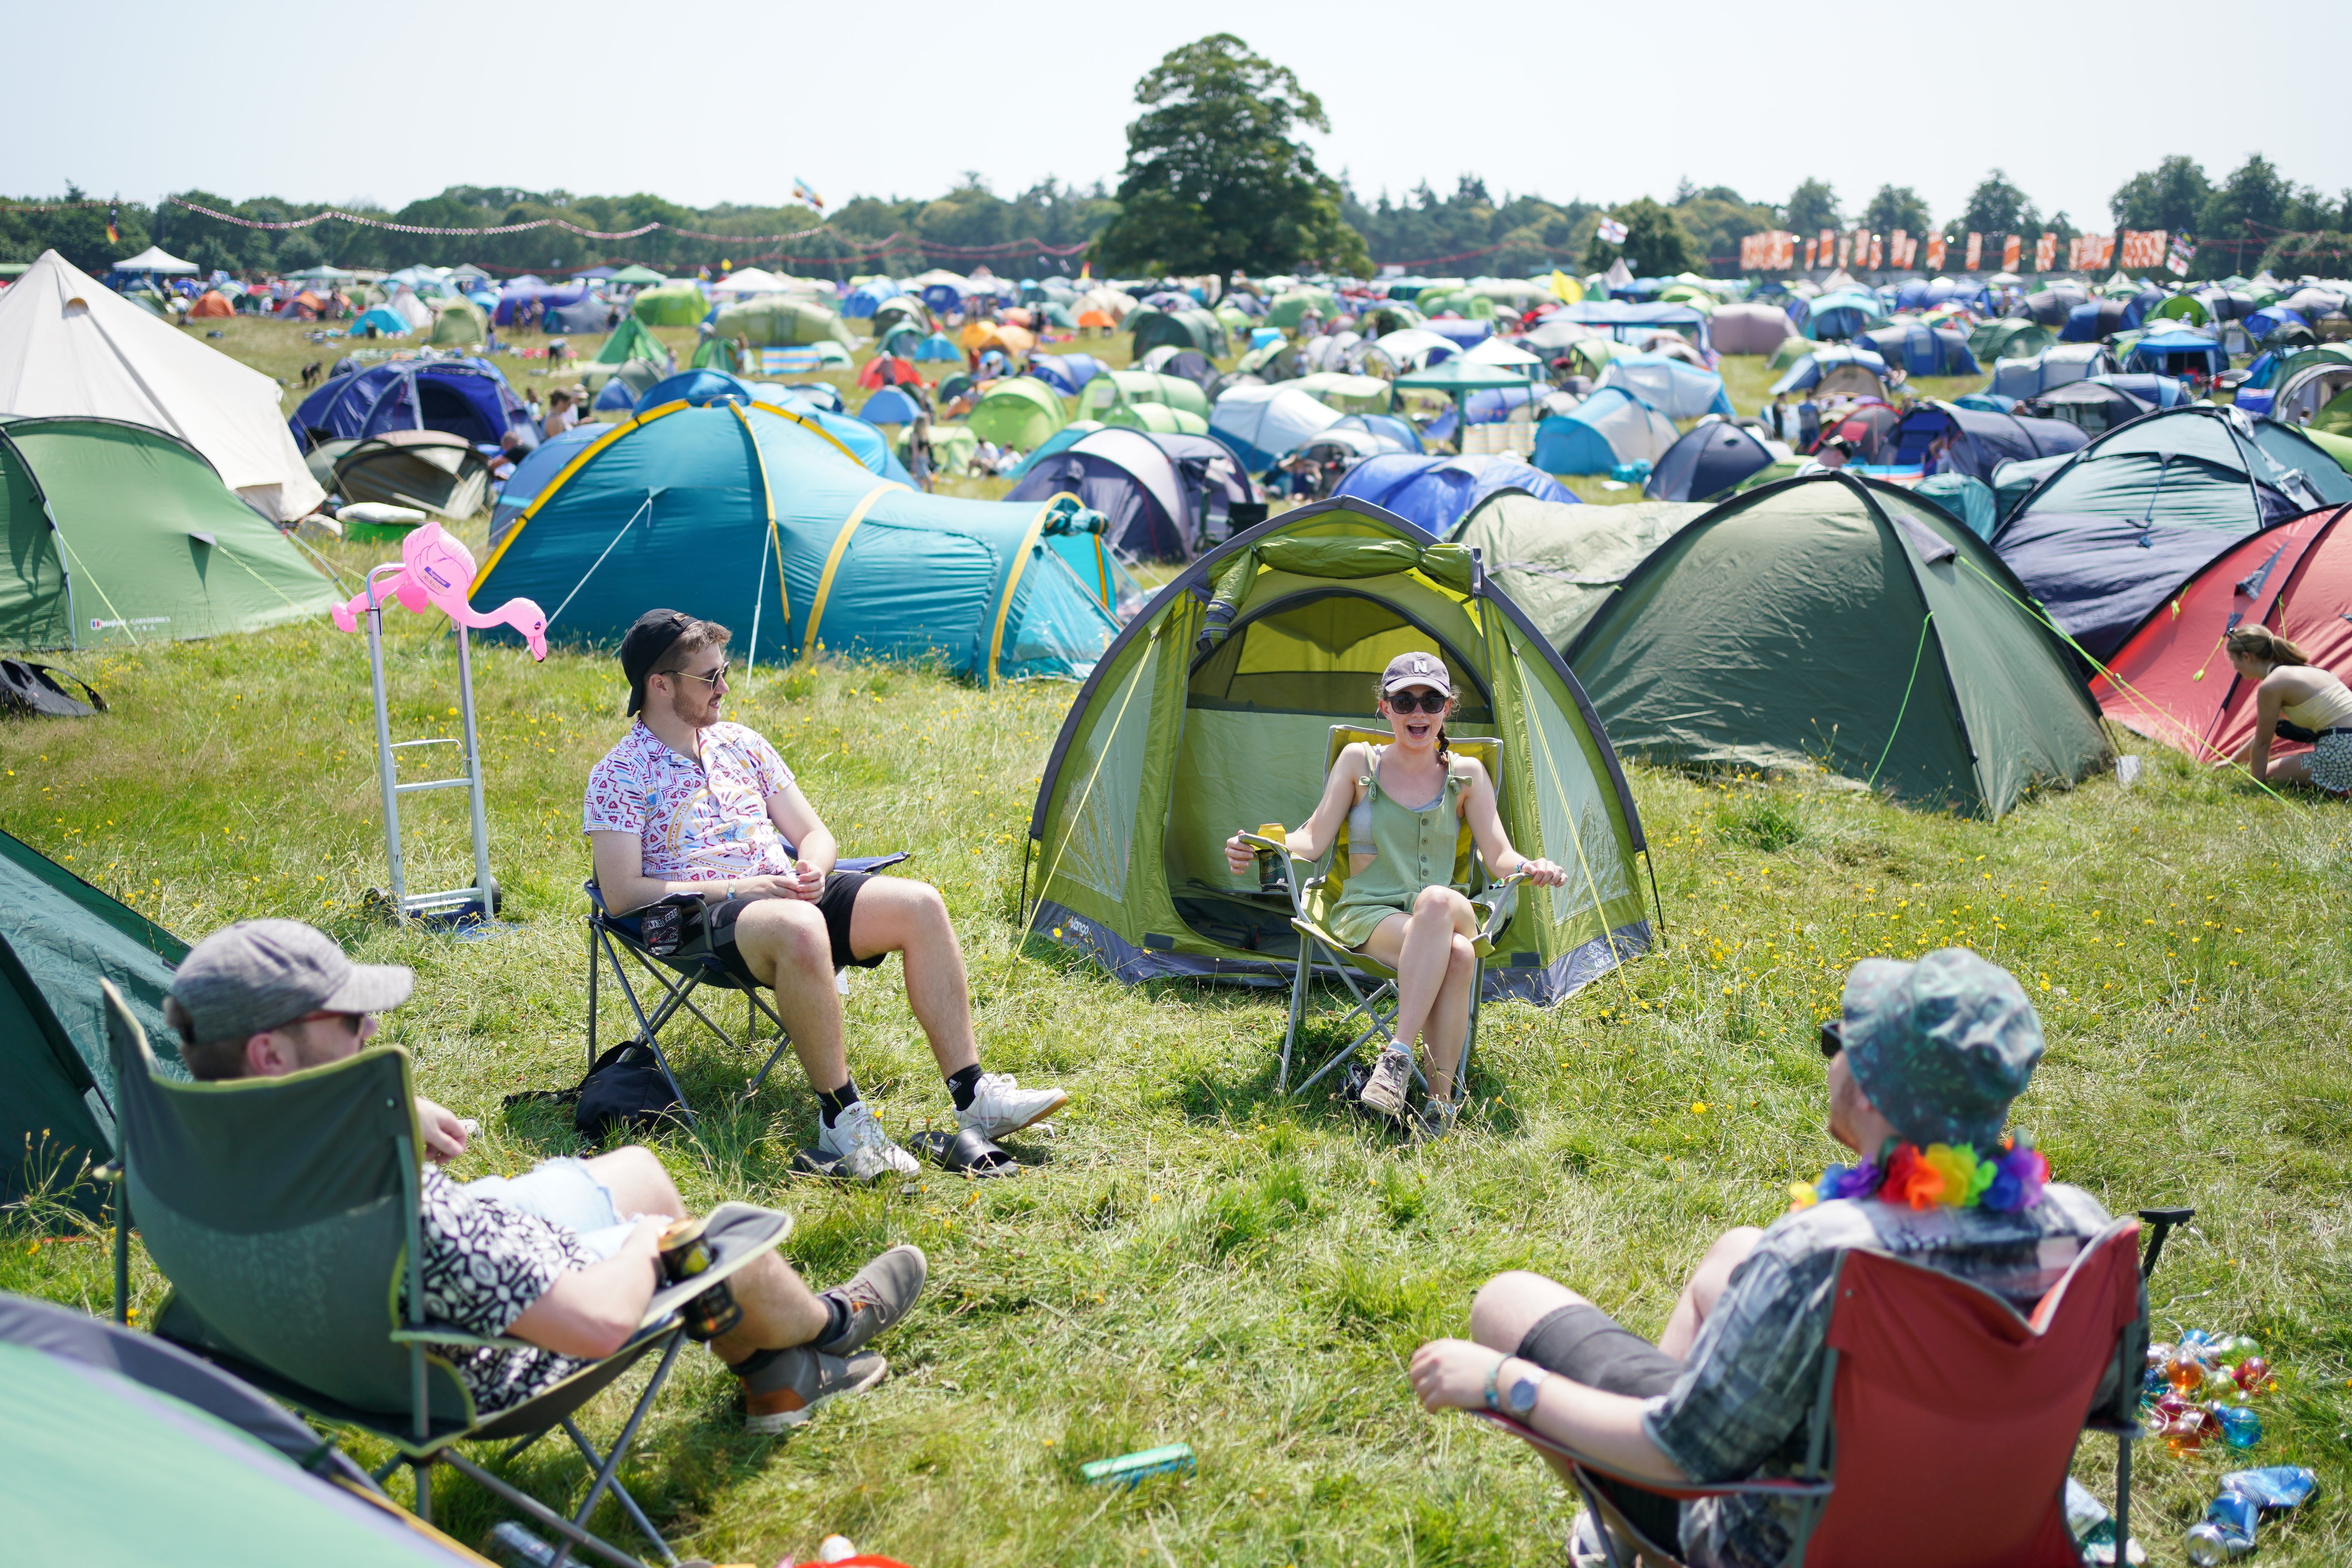 Festivalgoers sit amongst their tents at the Latitude festival in Henham Park, Southwold, Suffolk. Picture date: Thursday July 22, 2021.